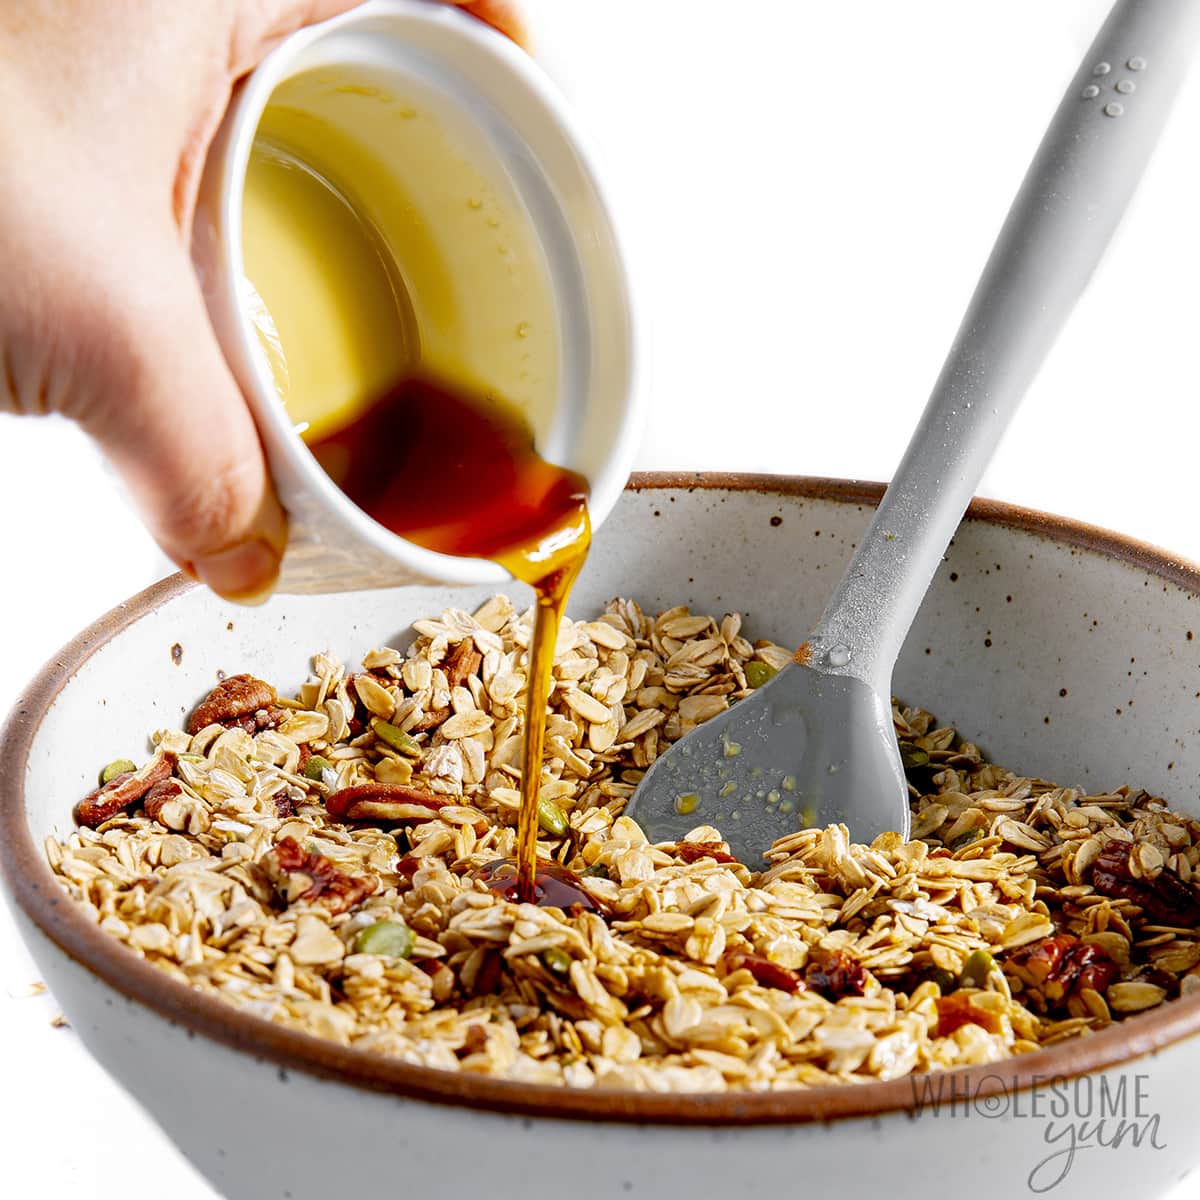 Maple syrup added to oats and other ingredients.